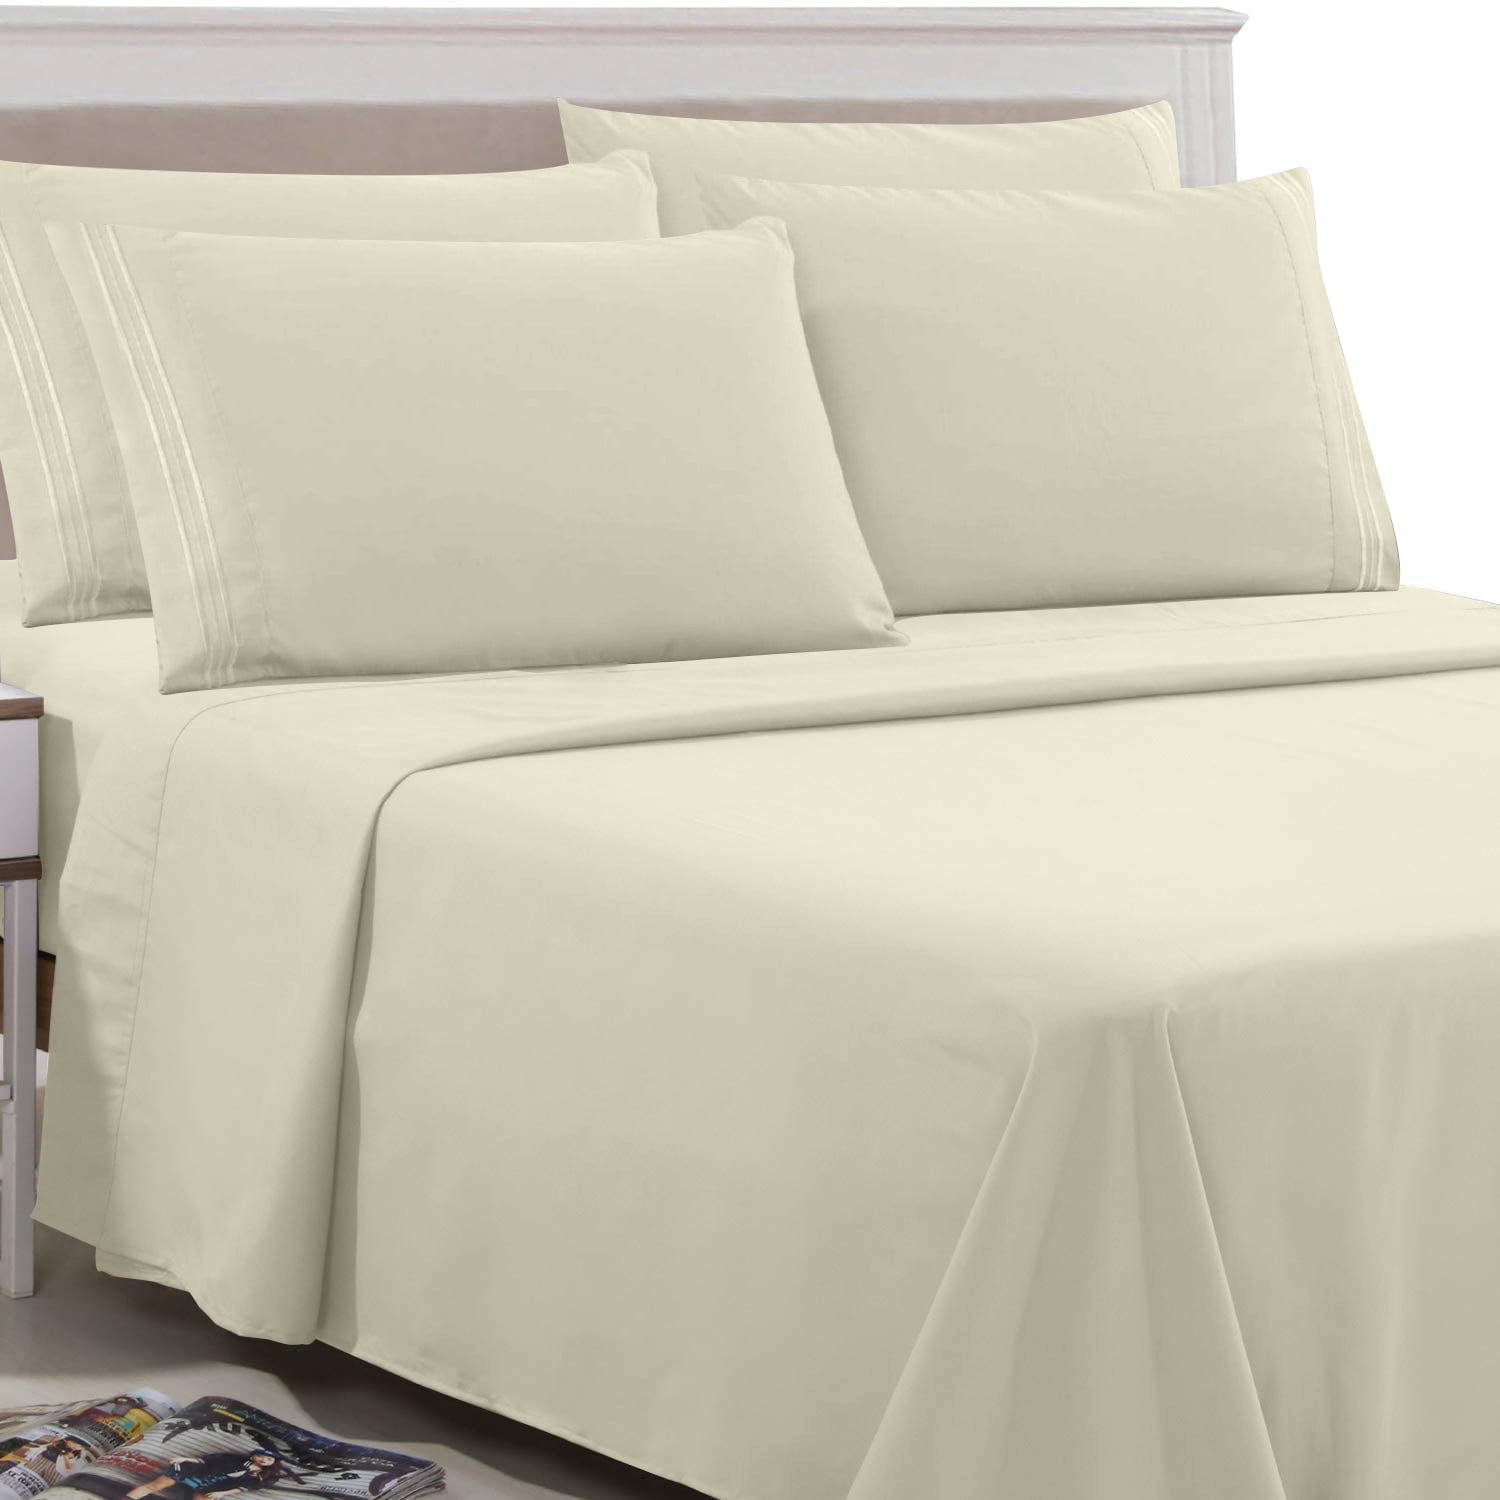 Details about  / Full Sheets 4 piece Sets 200 thread count New Comfort Bay Choice color